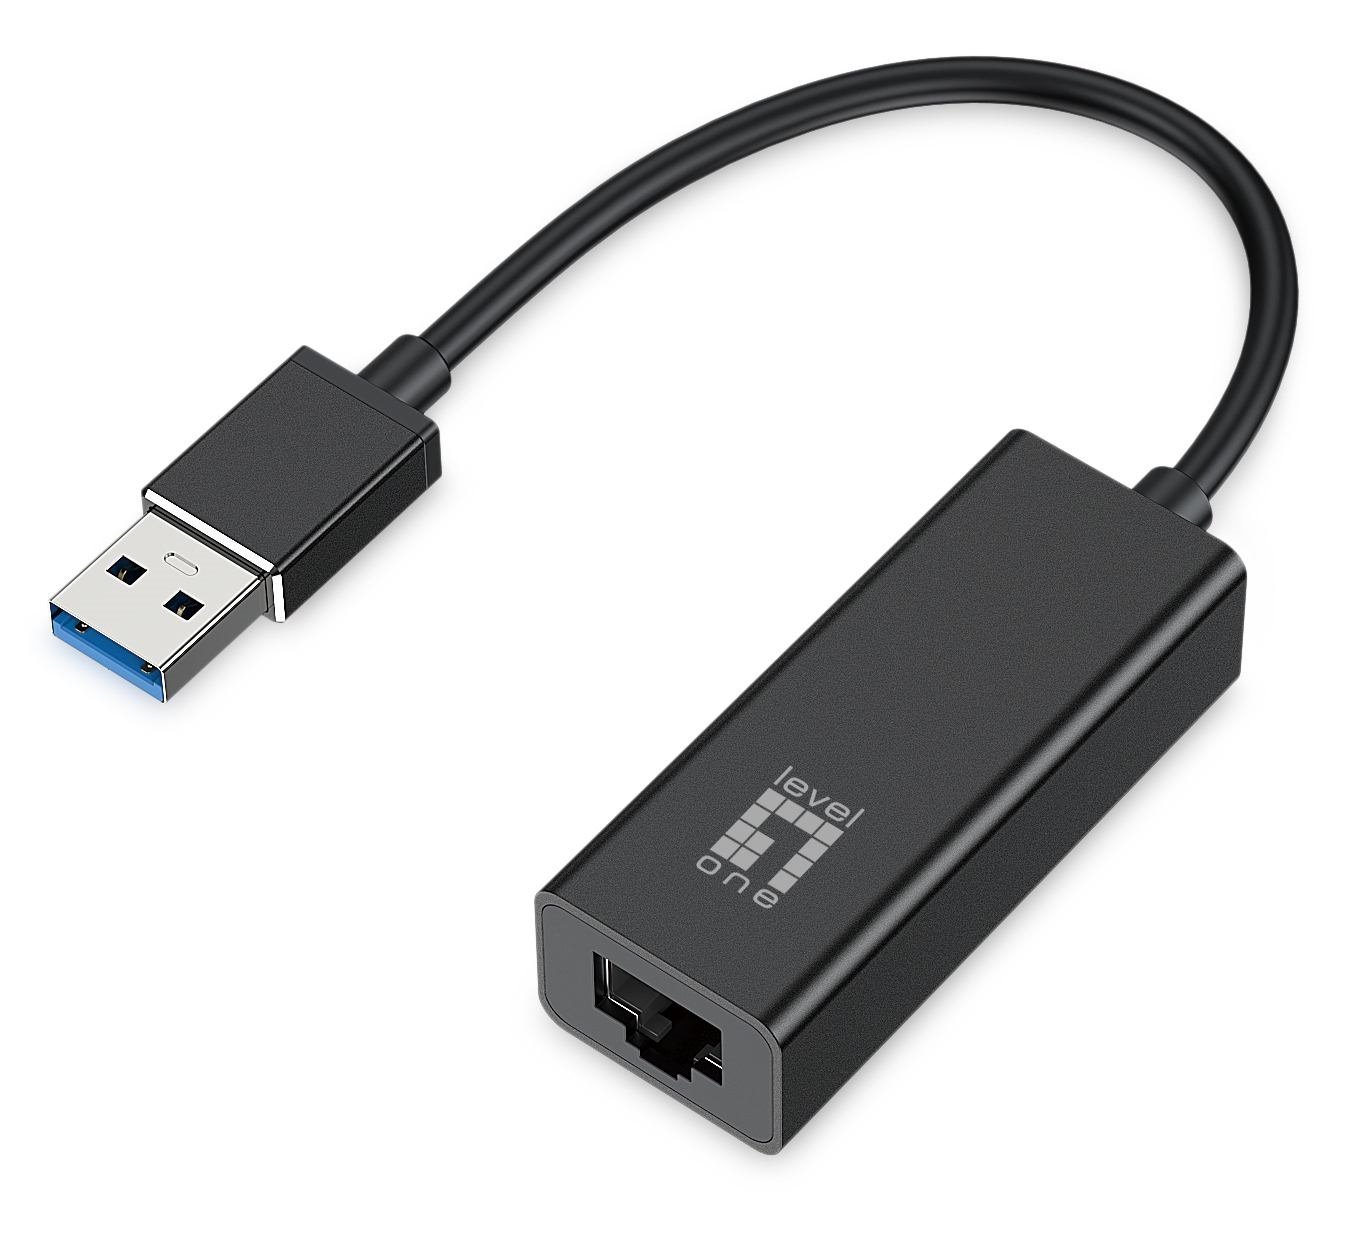 LevelOne Gigabit Usb Network Adapter (LevelOne Usb Gigabit Ethernet Adapter- Provides An Internet Connection Through A Single Usb port-10/100/1000Mbps Wire Speed Transmission And reception-Compatible